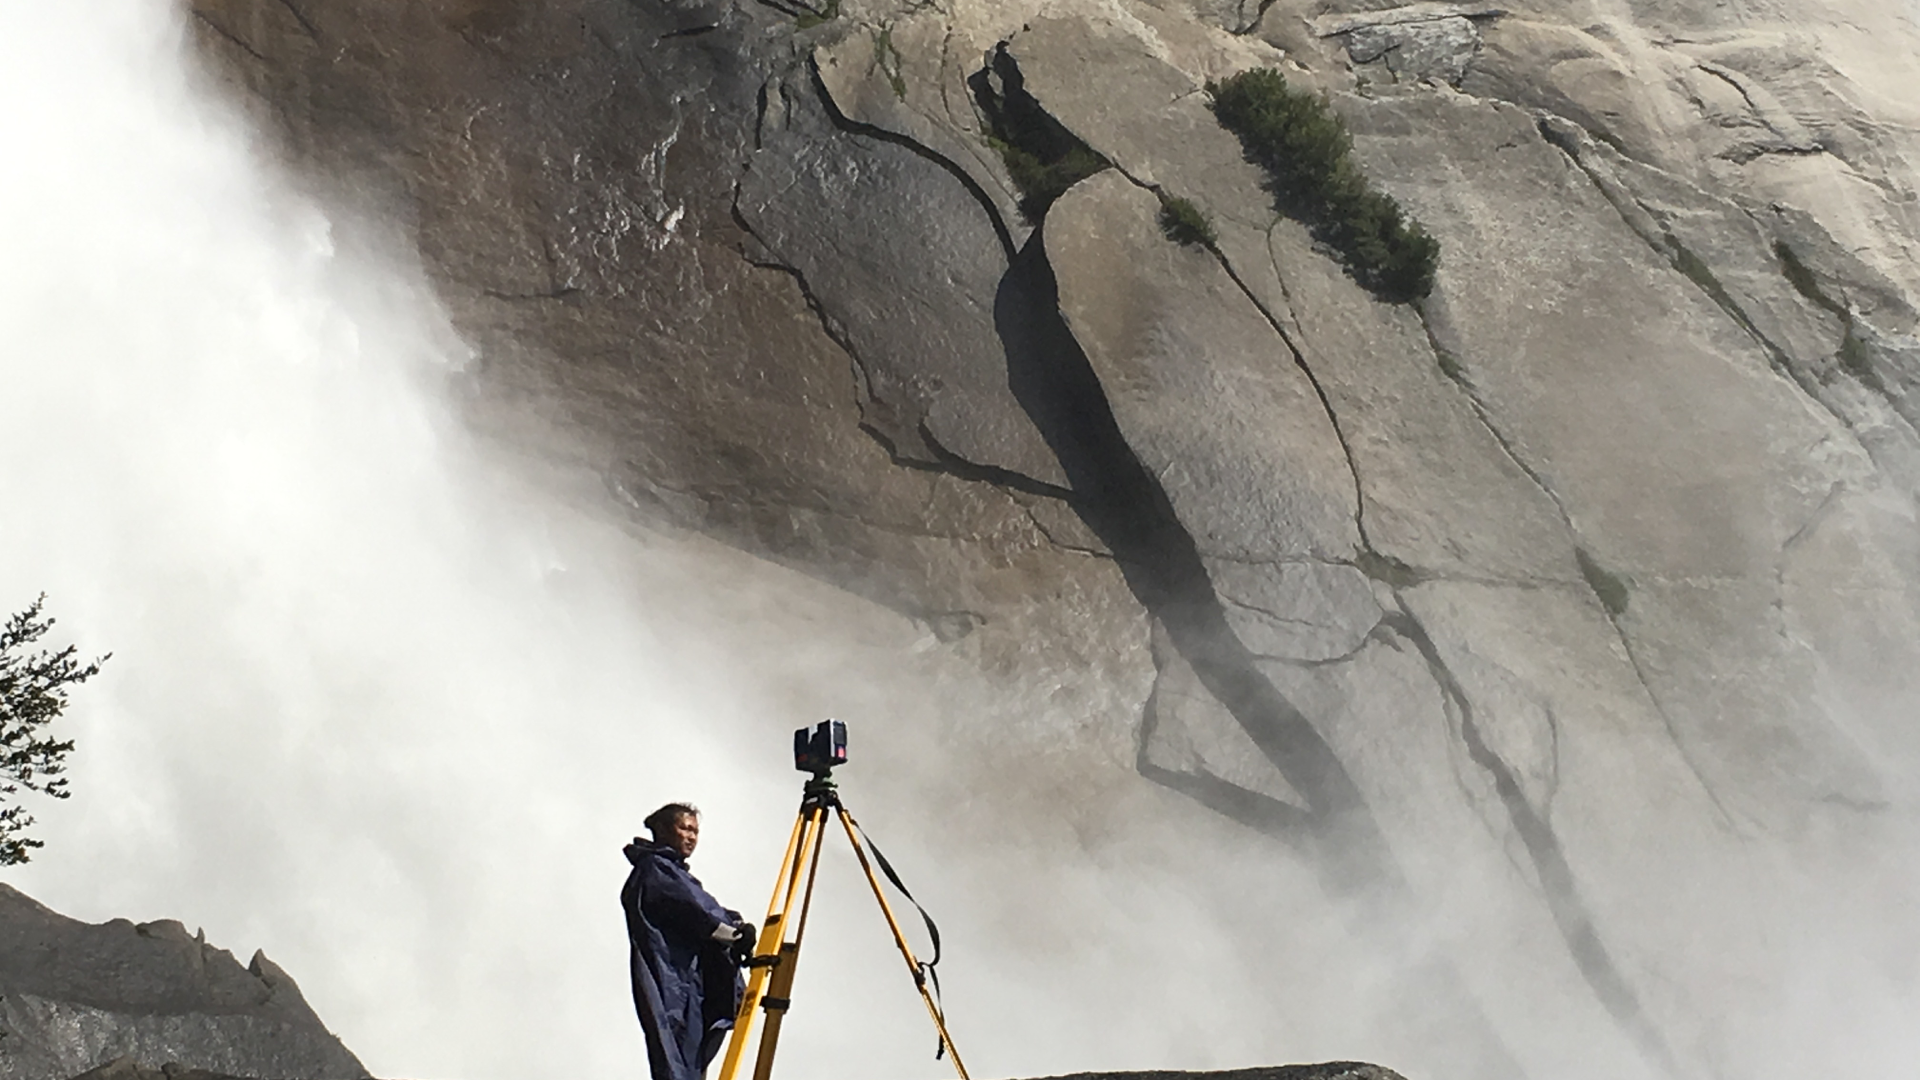 Scanning at the foot of Nevada Falls, Yosemite © ScanLAB Projects